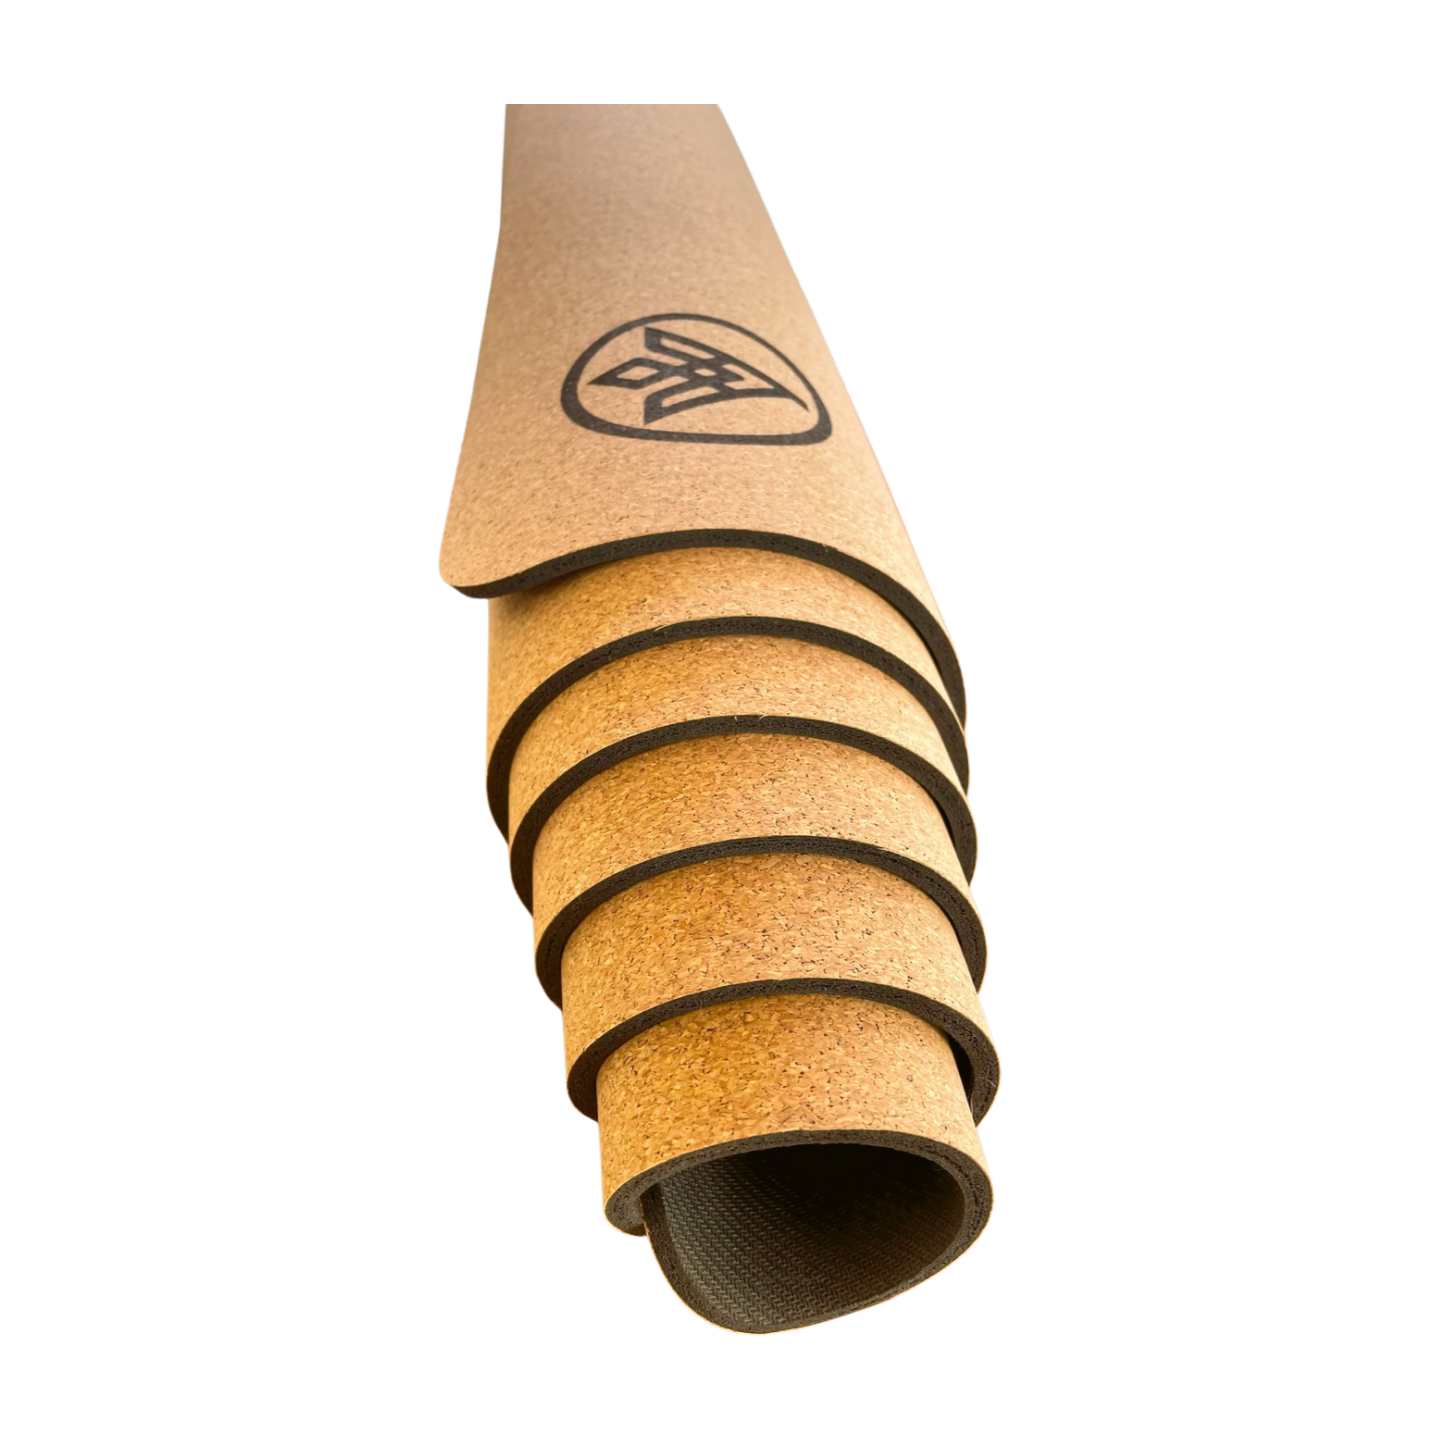 The Flux cork yoga mat rolled in layers to highlight the cork top aesthetic and construction